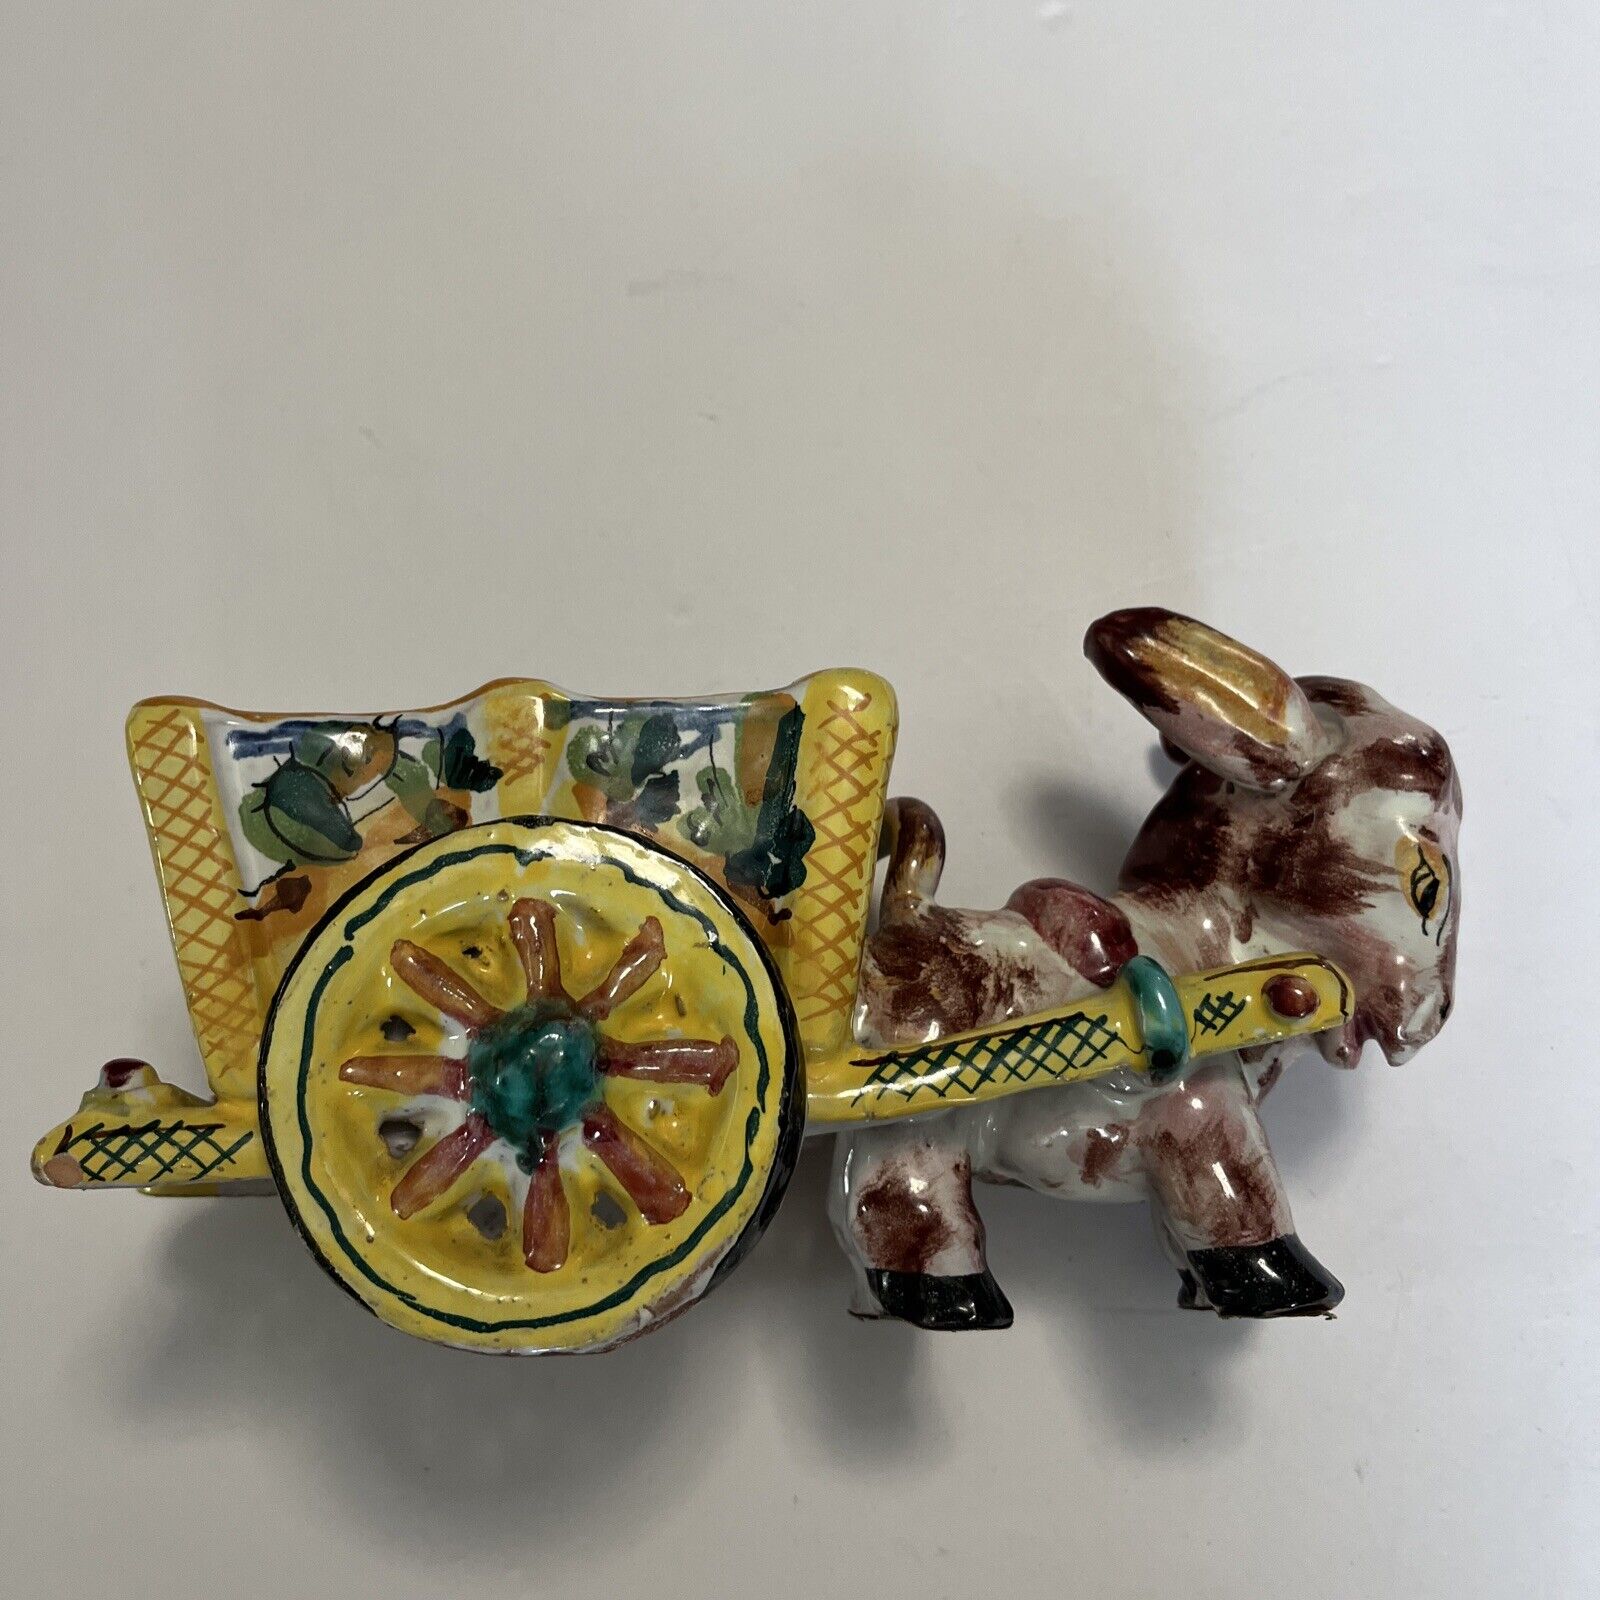 Vintage Ceramic Donkey Pulling Cart Planter Made in Italy M